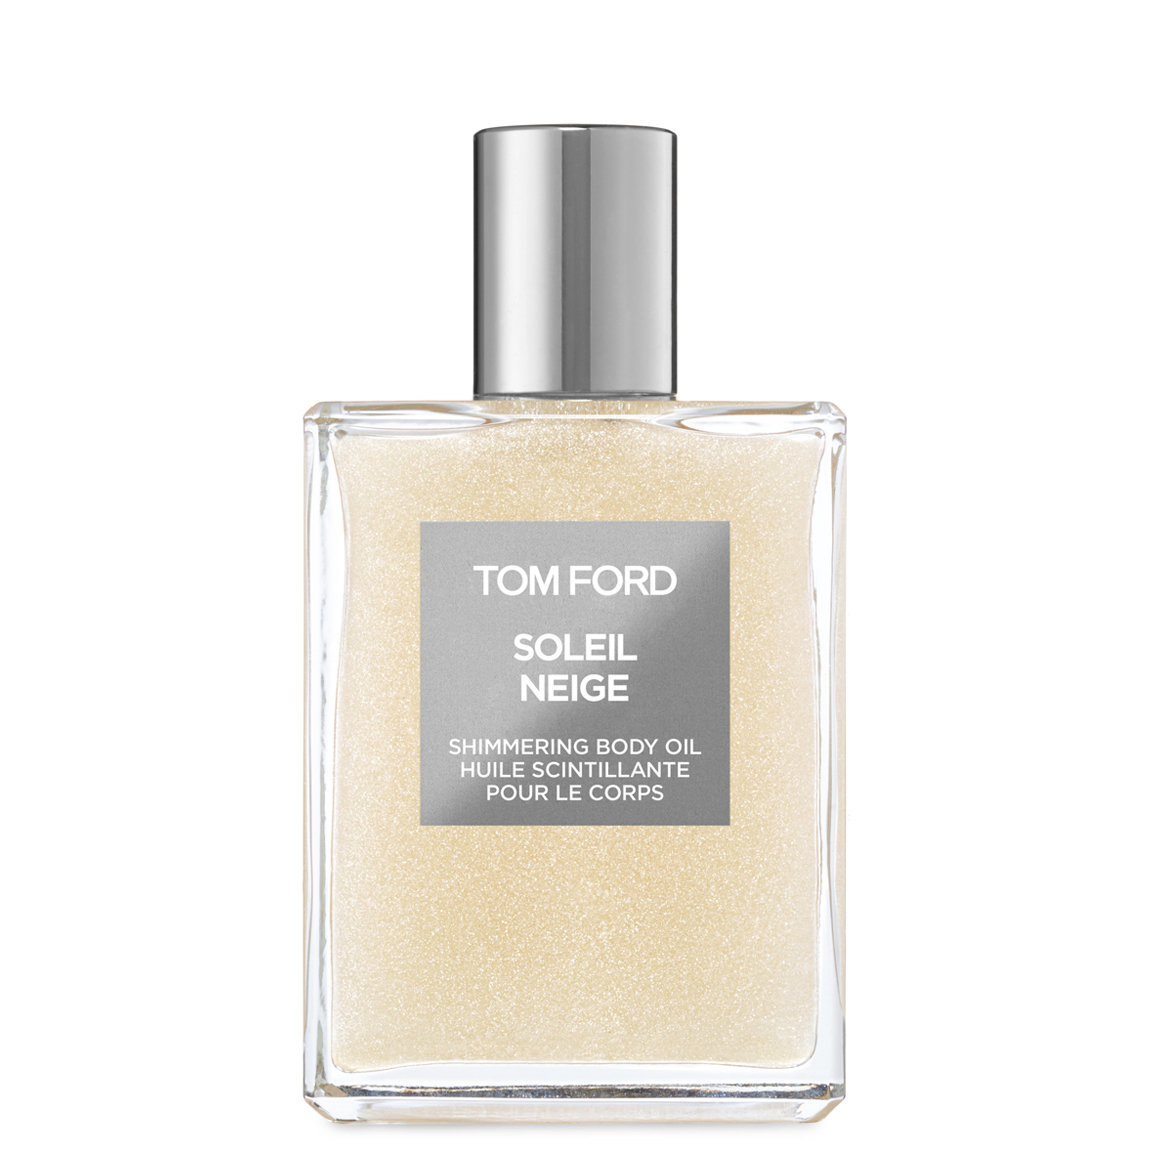 TOM FORD Soleil Neige Shimmering Body Oil alternative view 1 - product swatch.